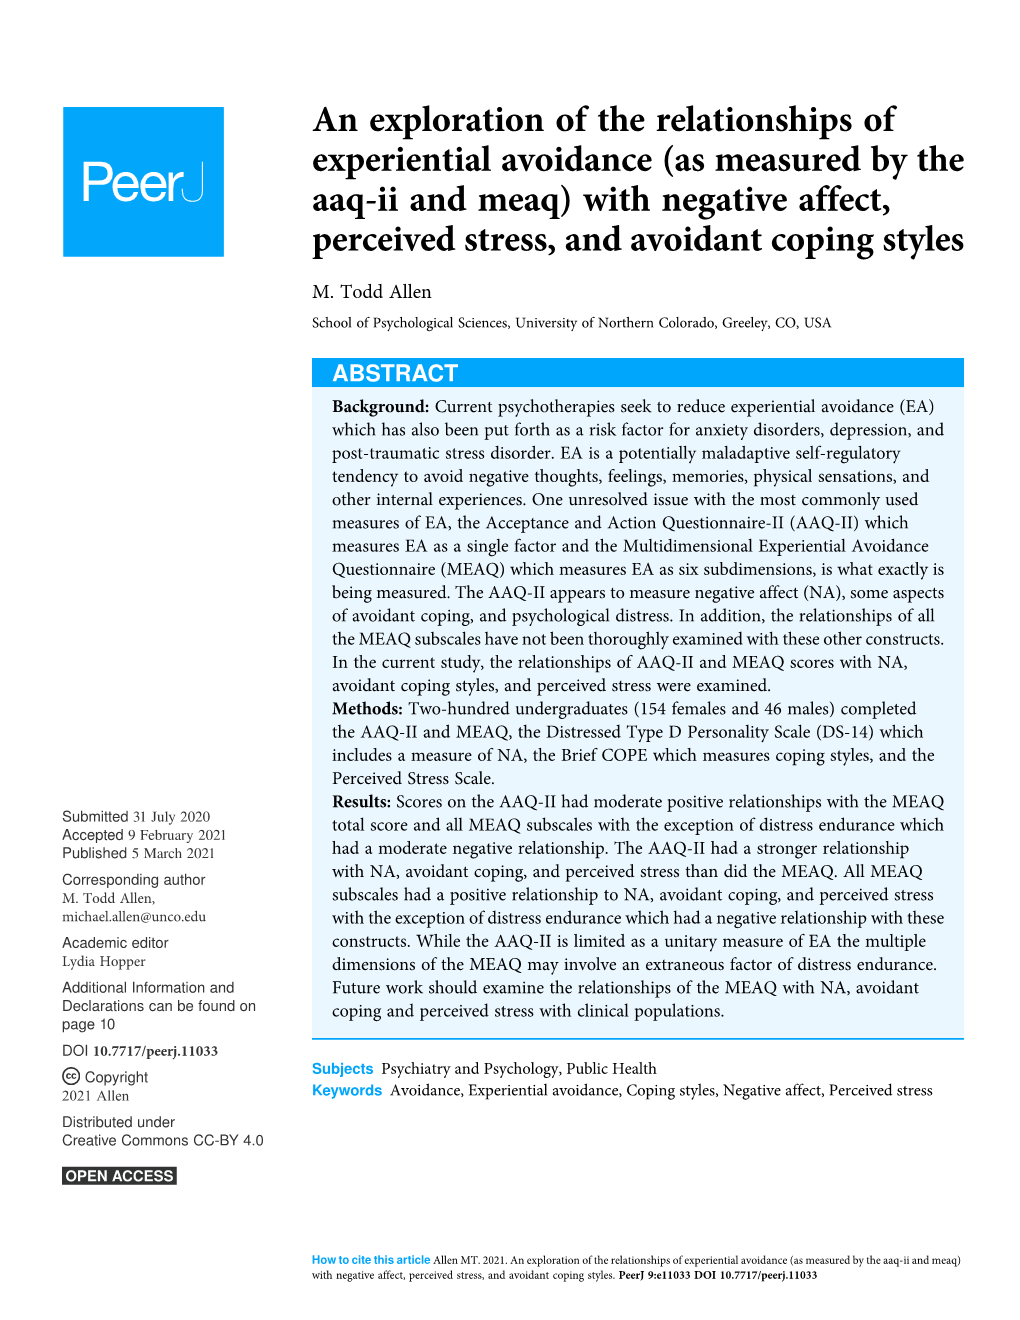 (As Measured by the Aaq-Ii and Meaq) with Negative Affect, Perceived Stress, and Avoidant Coping Styles